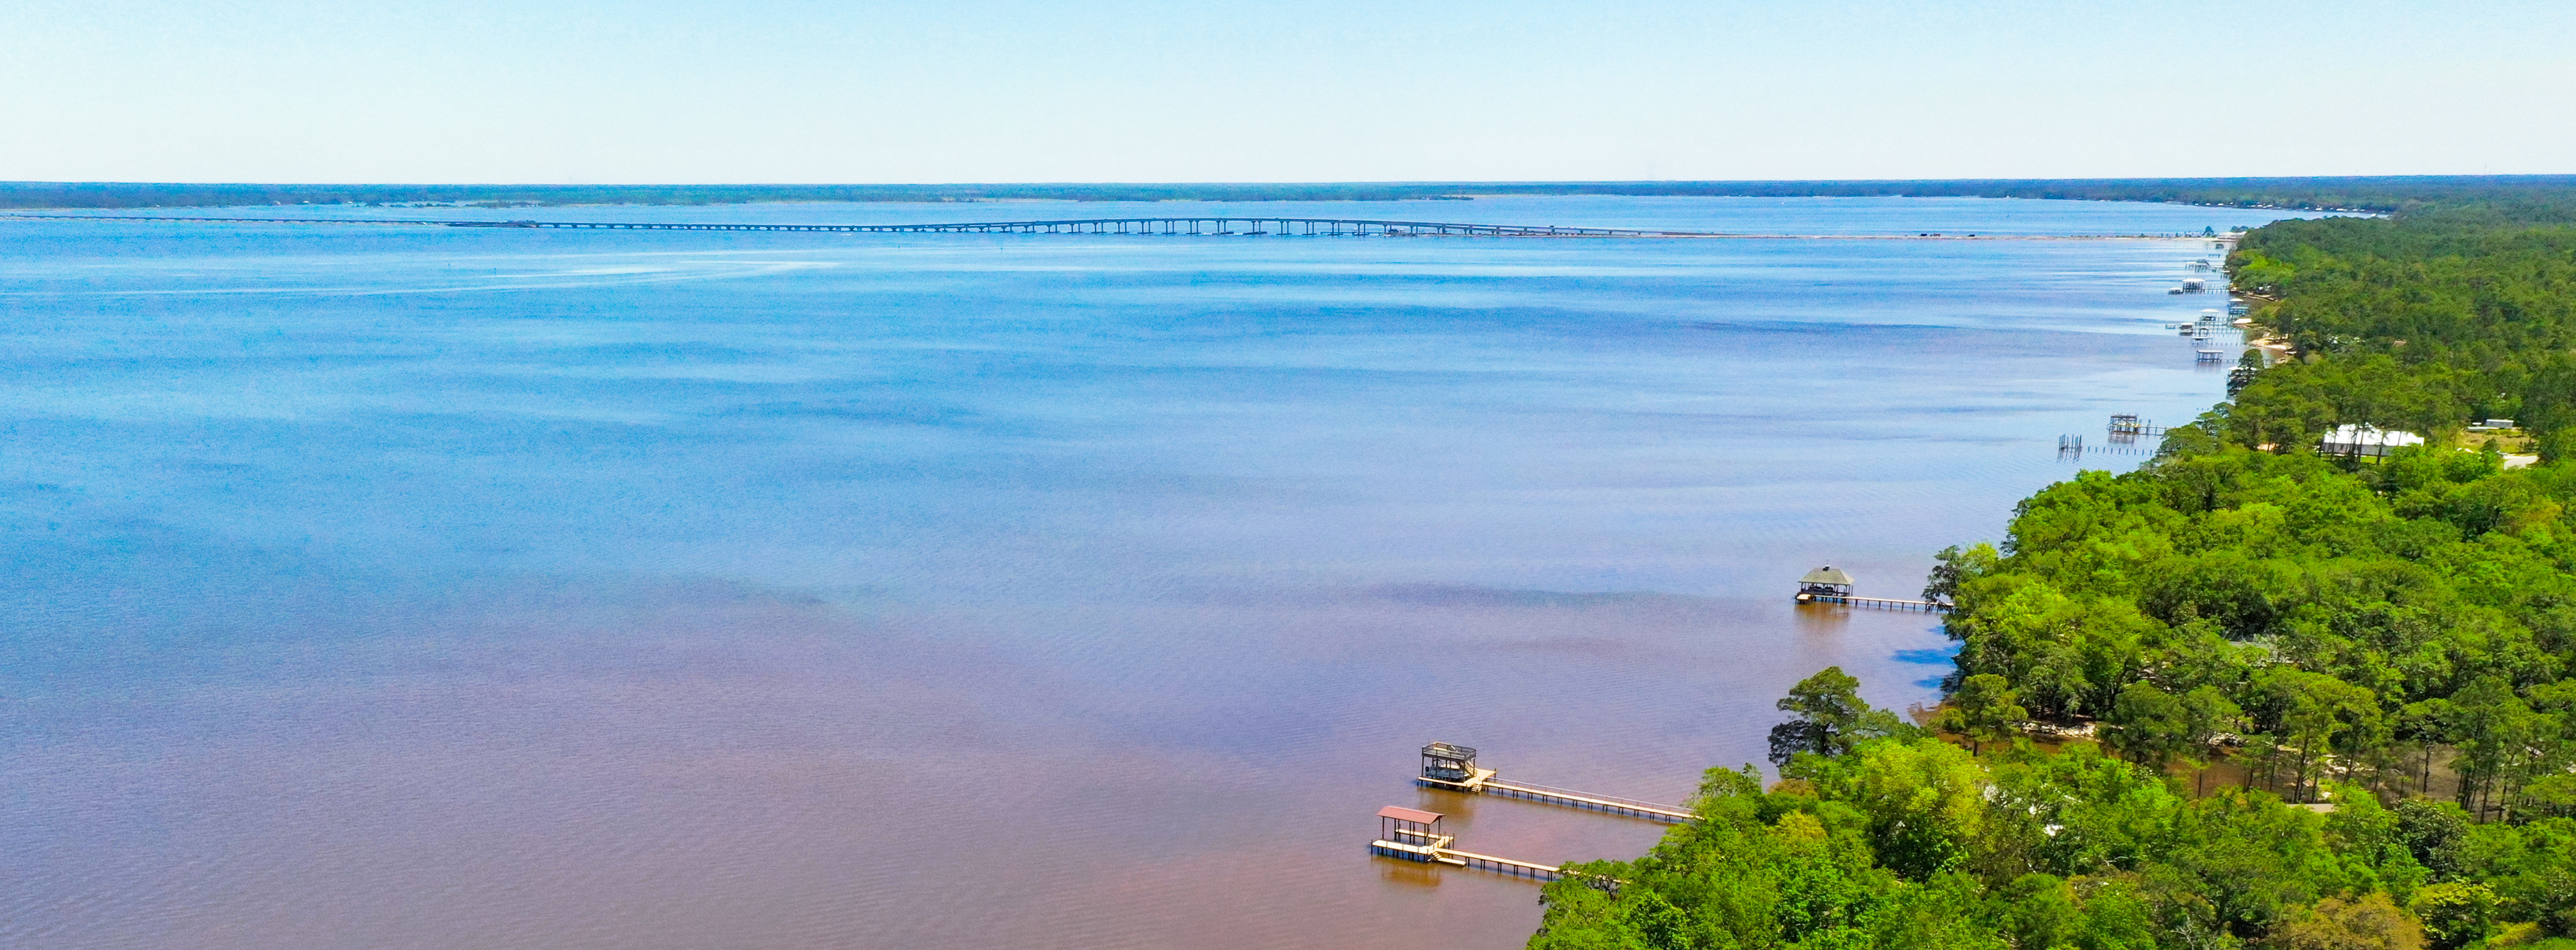 An aerial view of Choctawhatchee Bay in Santa Rosa Beach highlighting some of the private boat docks